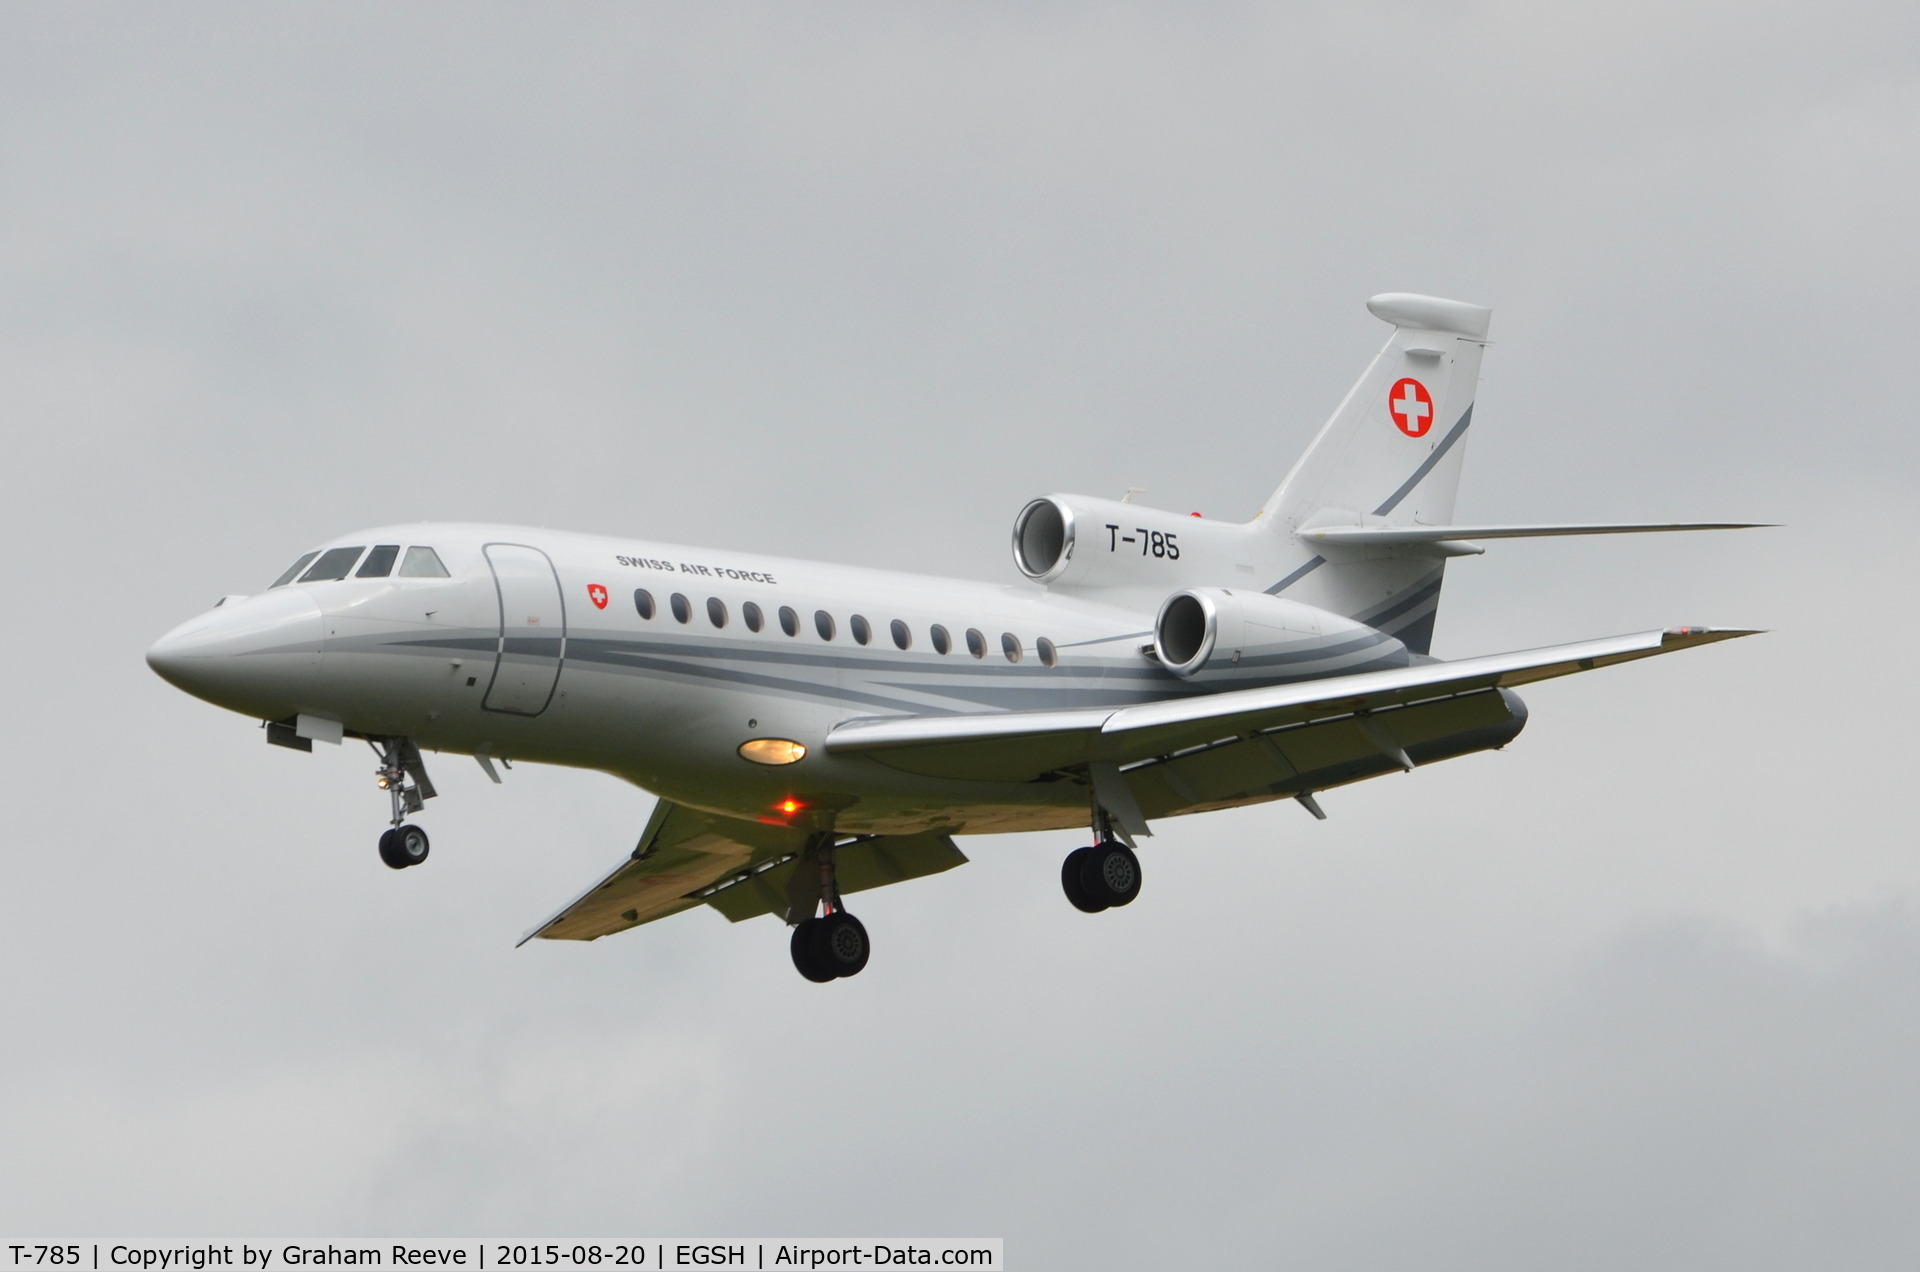 T-785, 2007 Dassault Falcon 900EX EASy II C/N 195, Landing at Norwich exactly one year after it's last visit.